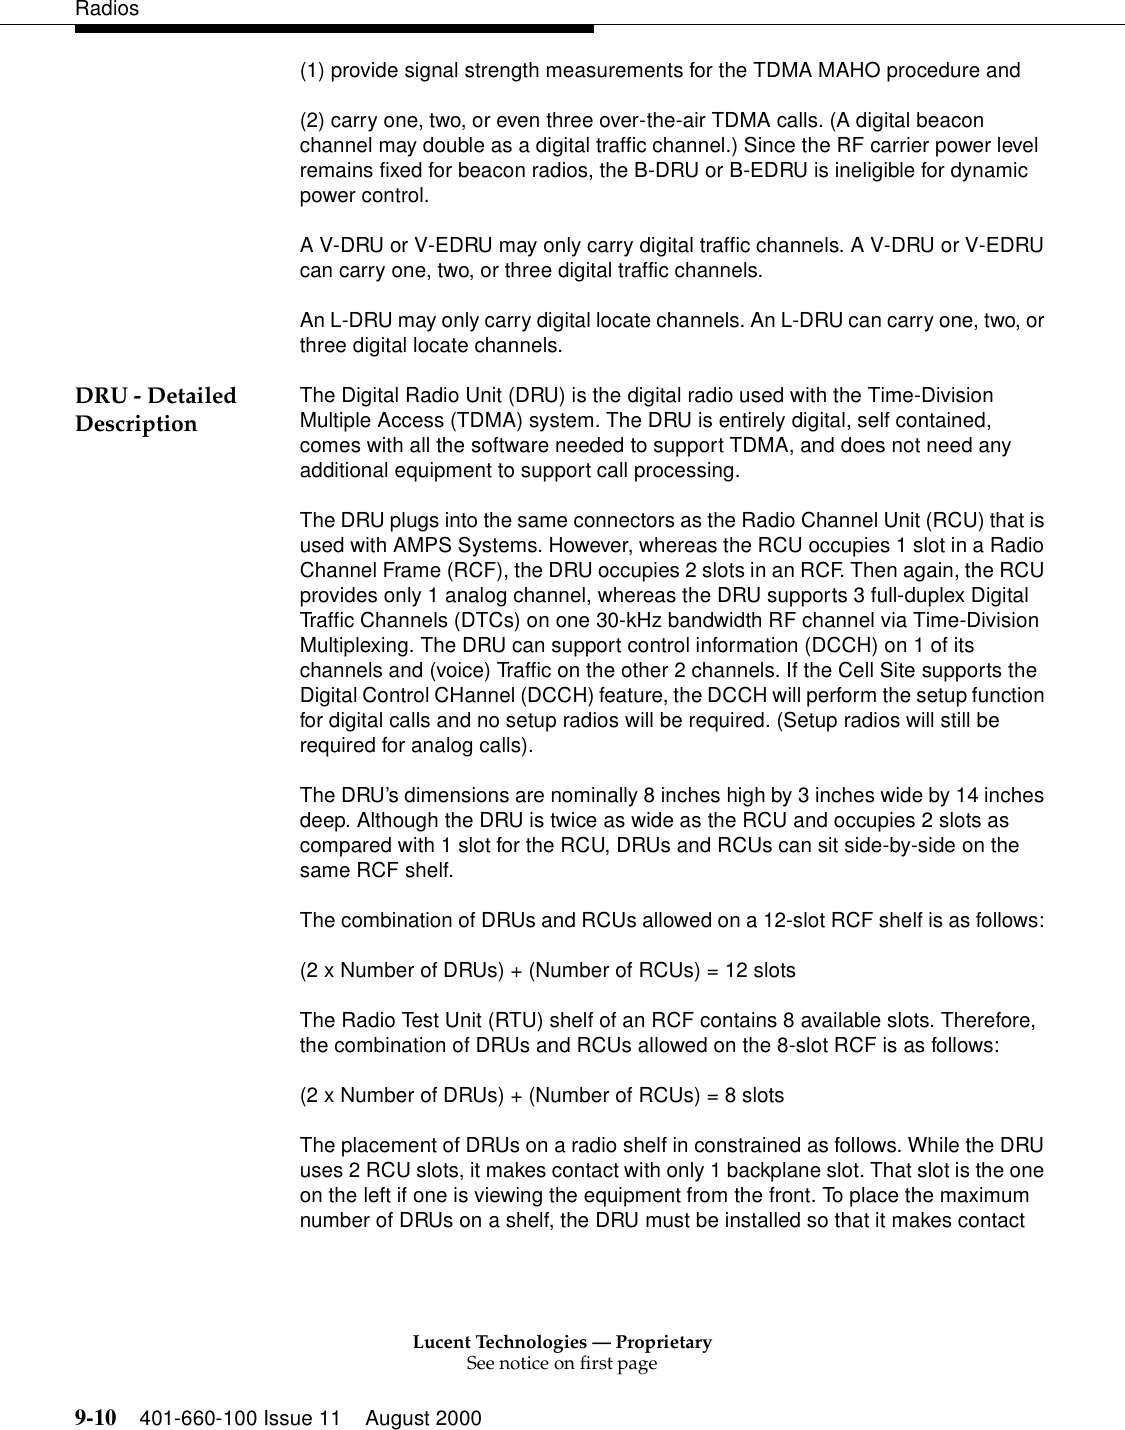 Lucent Technologies — ProprietarySee notice on first page9-10 401-660-100 Issue 11 August 2000Radios(1) provide signal strength measurements for the TDMA MAHO procedure and (2) carry one, two, or even three over-the-air TDMA calls. (A digital beacon channel may double as a digital traffic channel.) Since the RF carrier power level remains fixed for beacon radios, the B-DRU or B-EDRU is ineligible for dynamic power control. A V-DRU or V-EDRU may only carry digital traffic channels. A V-DRU or V-EDRU can carry one, two, or three digital traffic channels. An L-DRU may only carry digital locate channels. An L-DRU can carry one, two, or three digital locate channels. DRU - Detailed Description The Digital Radio Unit (DRU) is the digital radio used with the Time-Division Multiple Access (TDMA) system. The DRU is entirely digital, self contained, comes with all the software needed to support TDMA, and does not need any additional equipment to support call processing. The DRU plugs into the same connectors as the Radio Channel Unit (RCU) that is used with AMPS Systems. However, whereas the RCU occupies 1 slot in a Radio Channel Frame (RCF), the DRU occupies 2 slots in an RCF. Then again, the RCU provides only 1 analog channel, whereas the DRU supports 3 full-duplex Digital Traffic Channels (DTCs) on one 30-kHz bandwidth RF channel via Time-Division Multiplexing. The DRU can support control information (DCCH) on 1 of its channels and (voice) Traffic on the other 2 channels. If the Cell Site supports the Digital Control CHannel (DCCH) feature, the DCCH will perform the setup function for digital calls and no setup radios will be required. (Setup radios will still be required for analog calls). The DRU’s dimensions are nominally 8 inches high by 3 inches wide by 14 inches deep. Although the DRU is twice as wide as the RCU and occupies 2 slots as compared with 1 slot for the RCU, DRUs and RCUs can sit side-by-side on the same RCF shelf. The combination of DRUs and RCUs allowed on a 12-slot RCF shelf is as follows: (2 x Number of DRUs) + (Number of RCUs) = 12 slots The Radio Test Unit (RTU) shelf of an RCF contains 8 available slots. Therefore, the combination of DRUs and RCUs allowed on the 8-slot RCF is as follows: (2 x Number of DRUs) + (Number of RCUs) = 8 slots The placement of DRUs on a radio shelf in constrained as follows. While the DRU uses 2 RCU slots, it makes contact with only 1 backplane slot. That slot is the one on the left if one is viewing the equipment from the front. To place the maximum number of DRUs on a shelf, the DRU must be installed so that it makes contact 